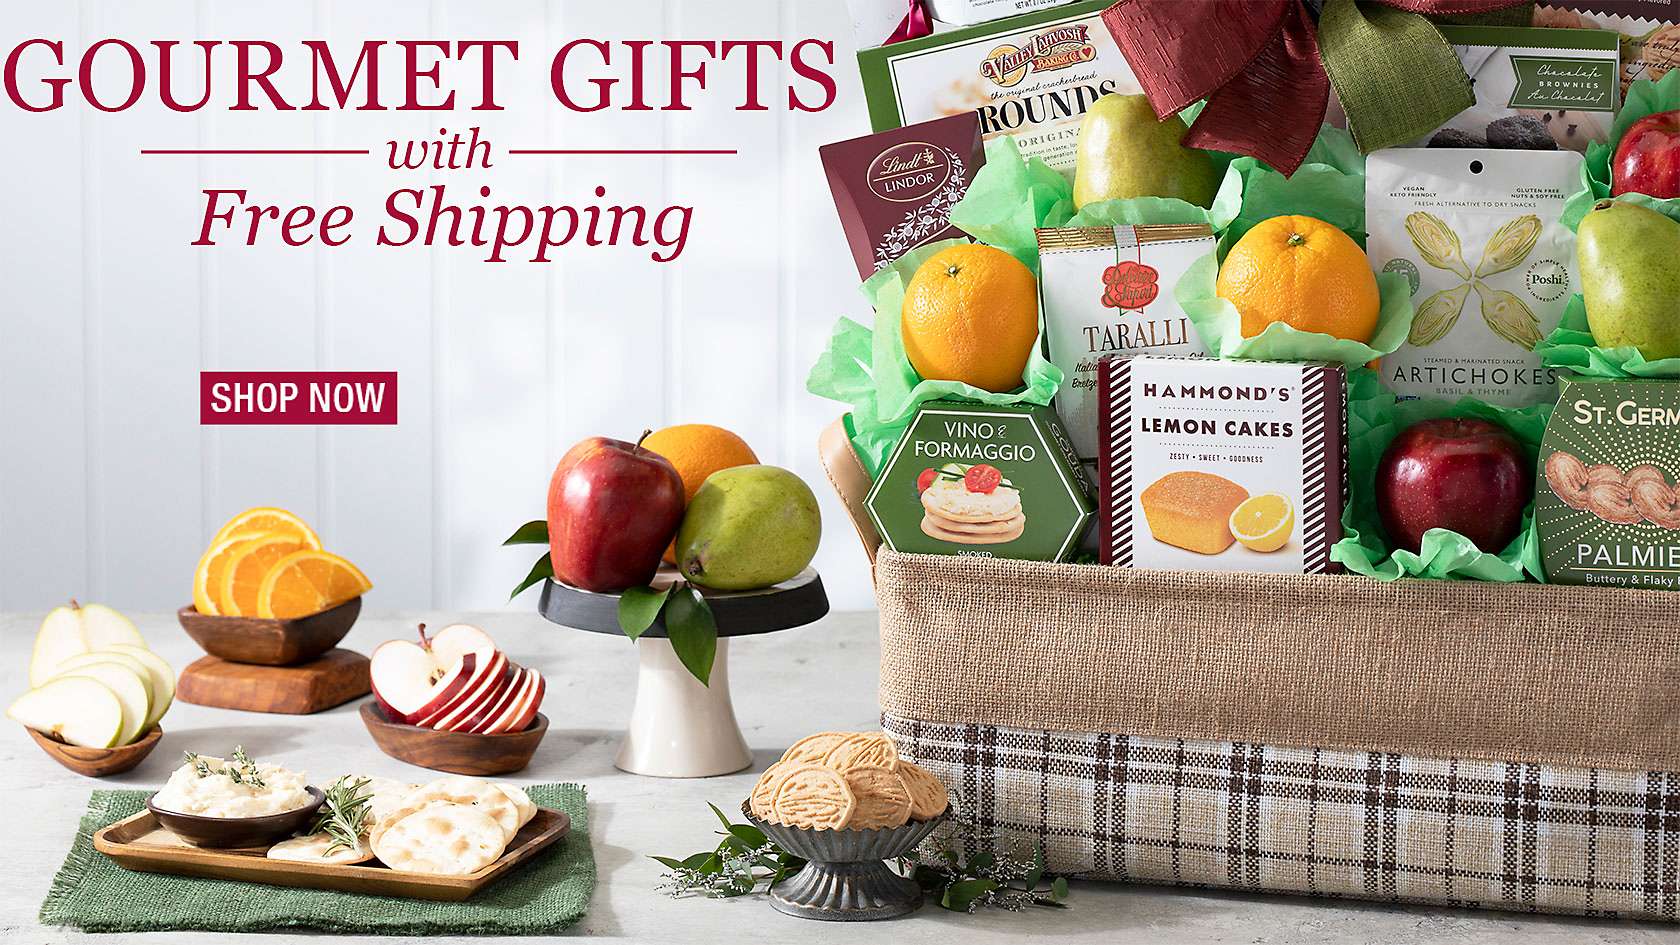 Gourmet gifts with free shipping